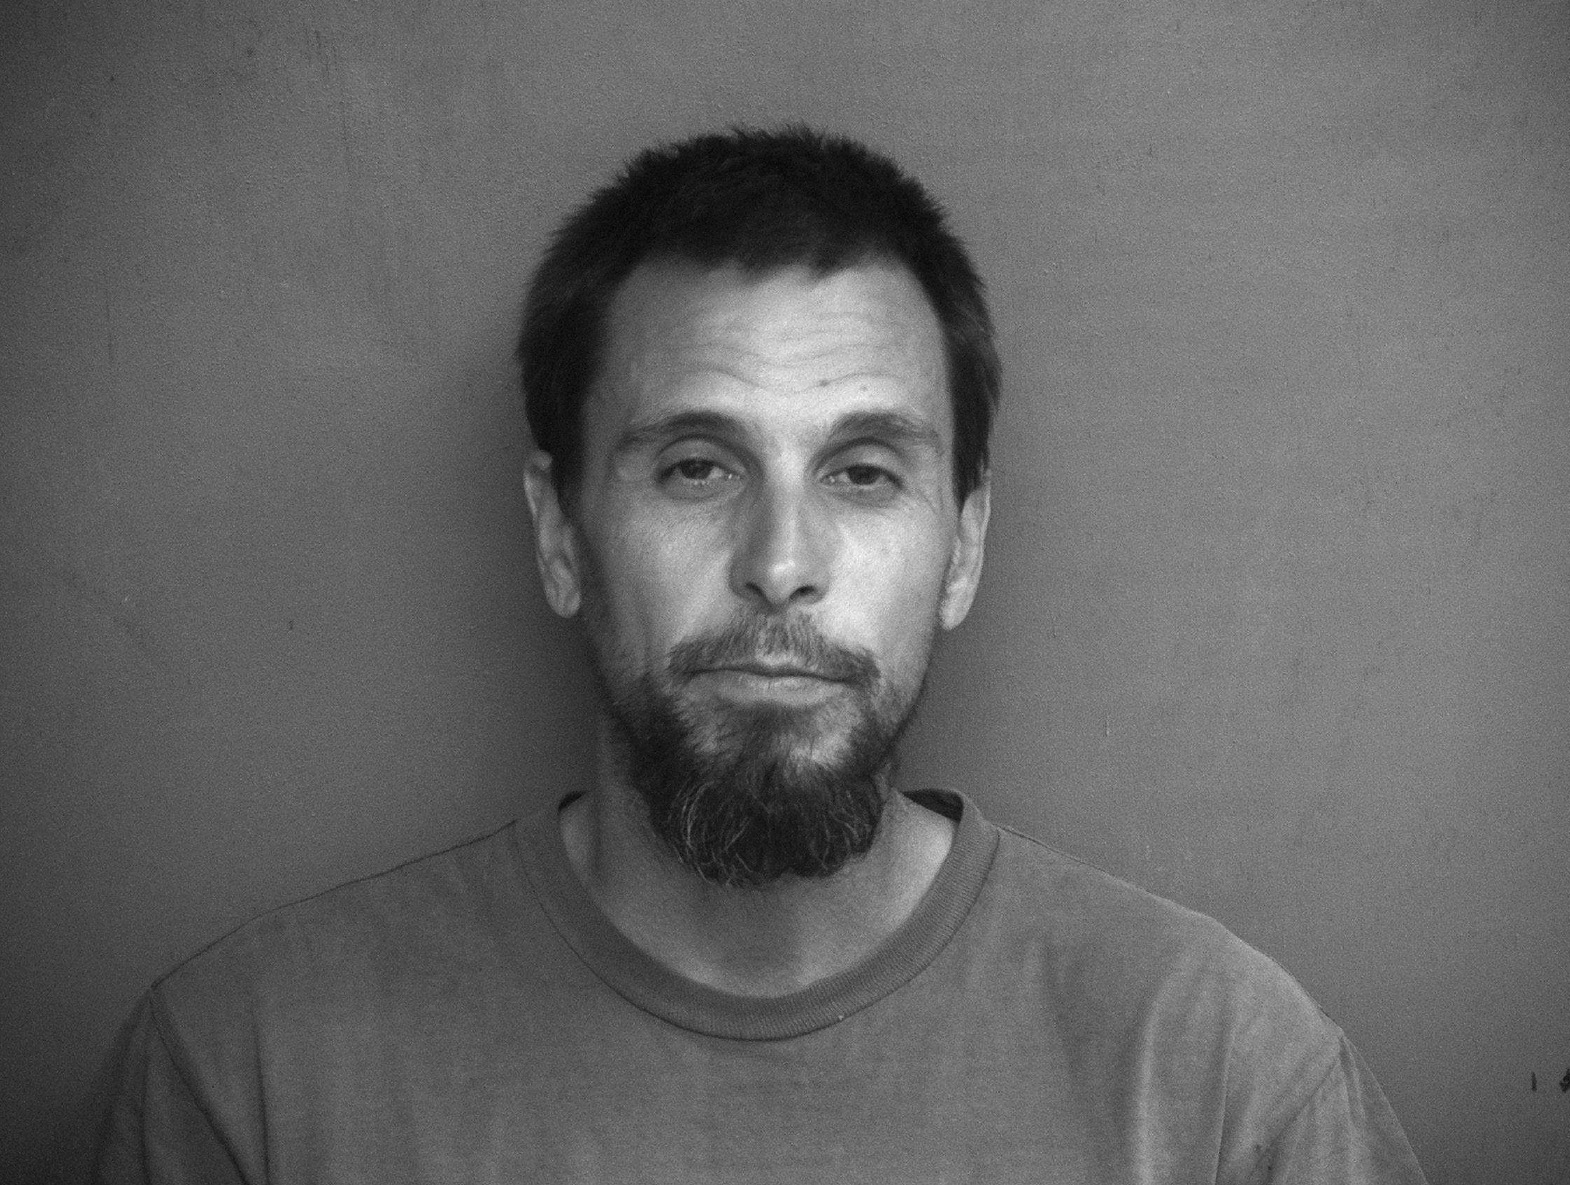 PHOTO: Matthew Brill was arrested for allegedly giving his 15-year-old son, David, marijuana to treat his seizures.